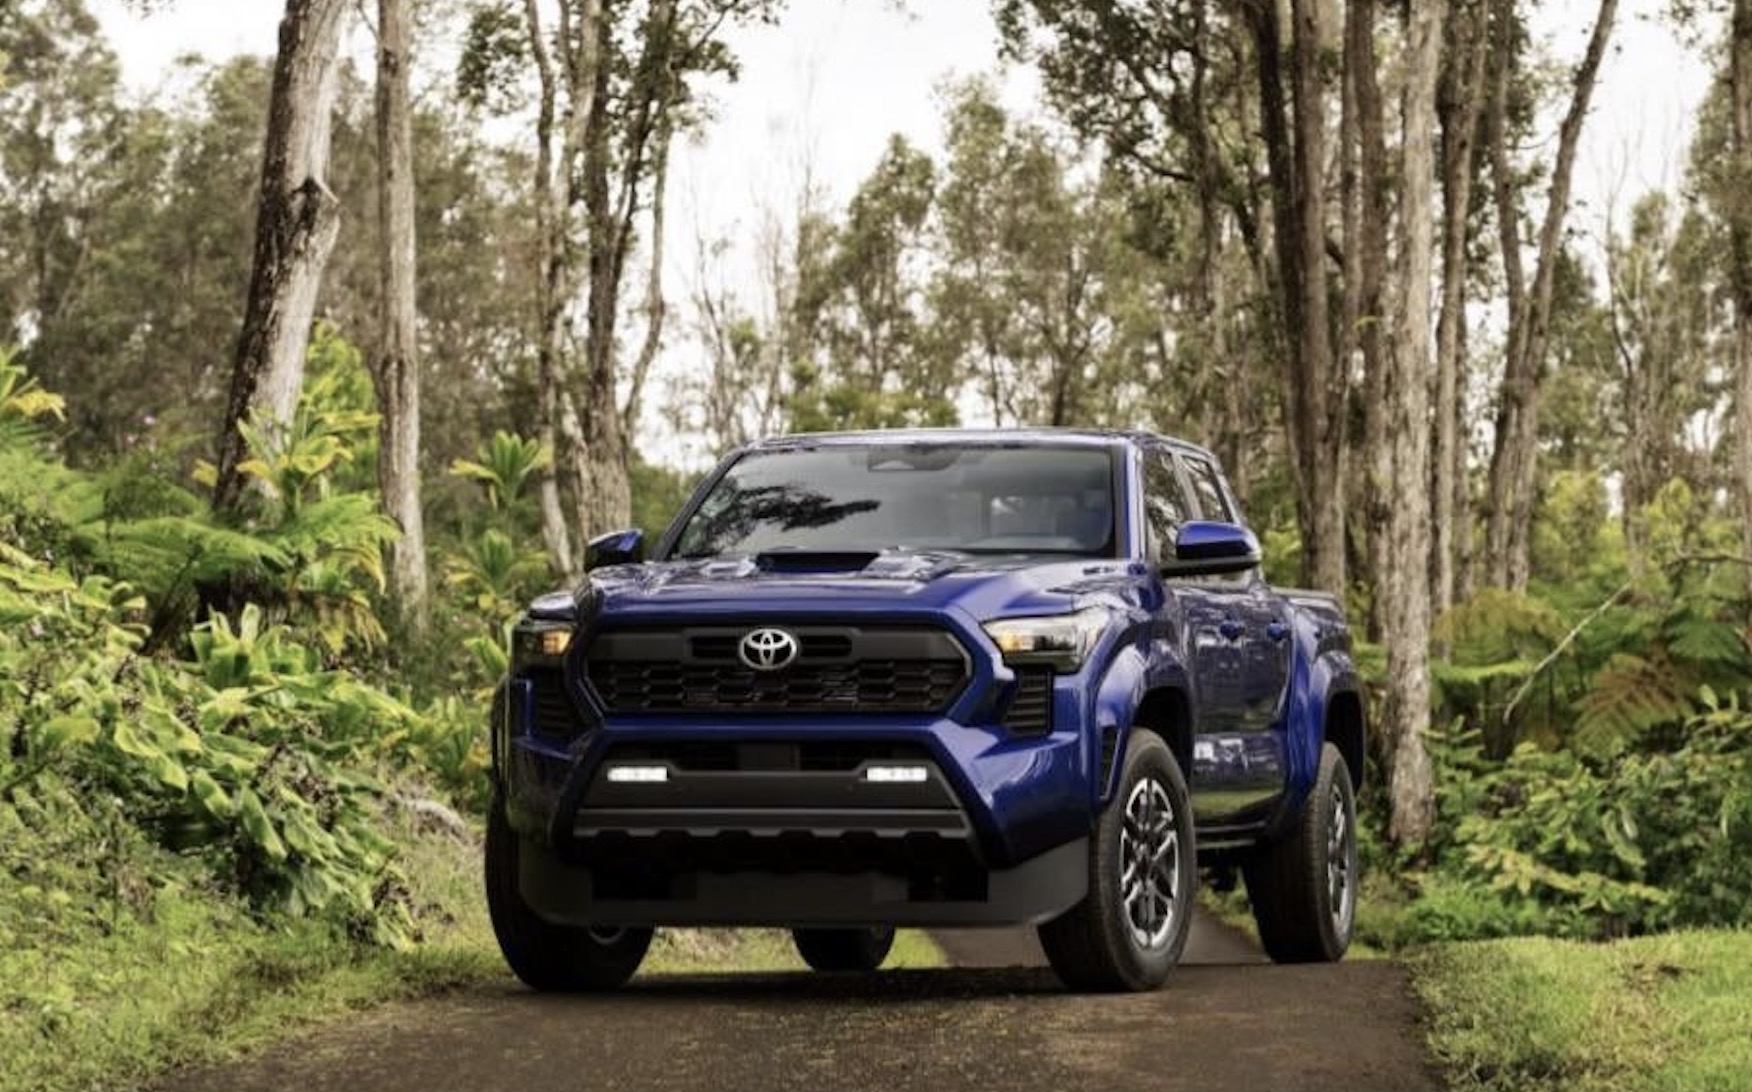 2024 Tacoma 2024 TACOMA REVEALED!! Specs, Wallpapers, Photos / Videos! Hybrid Model Added Screenshot 2023-05-18 at 2.14.11 PM